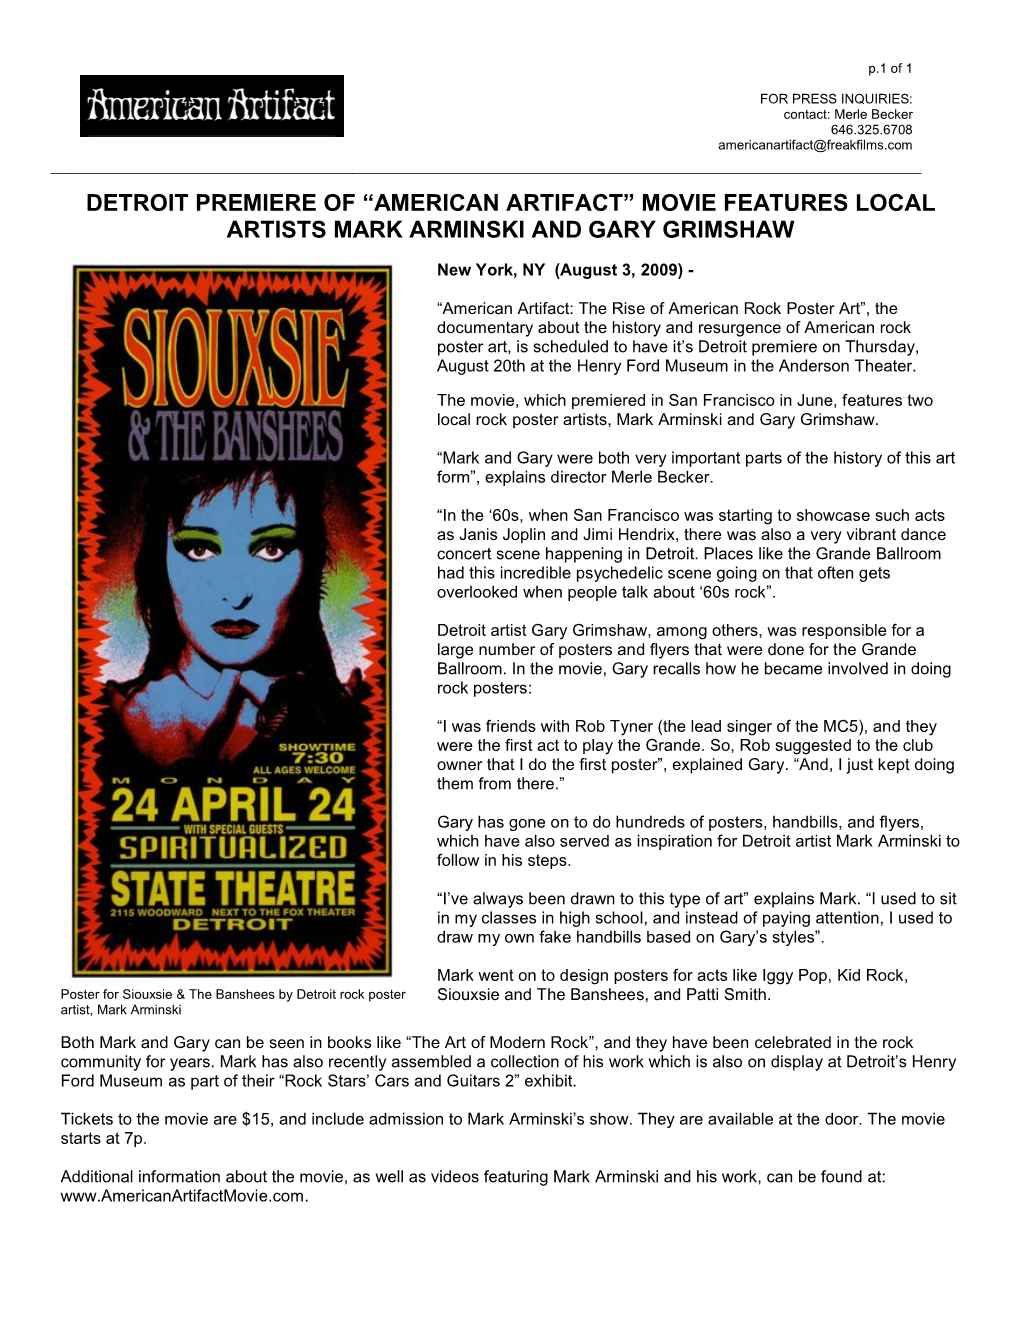 Detroit Premiere of “American Artifact” Movie Features Local Artists Mark Arminski and Gary Grimshaw